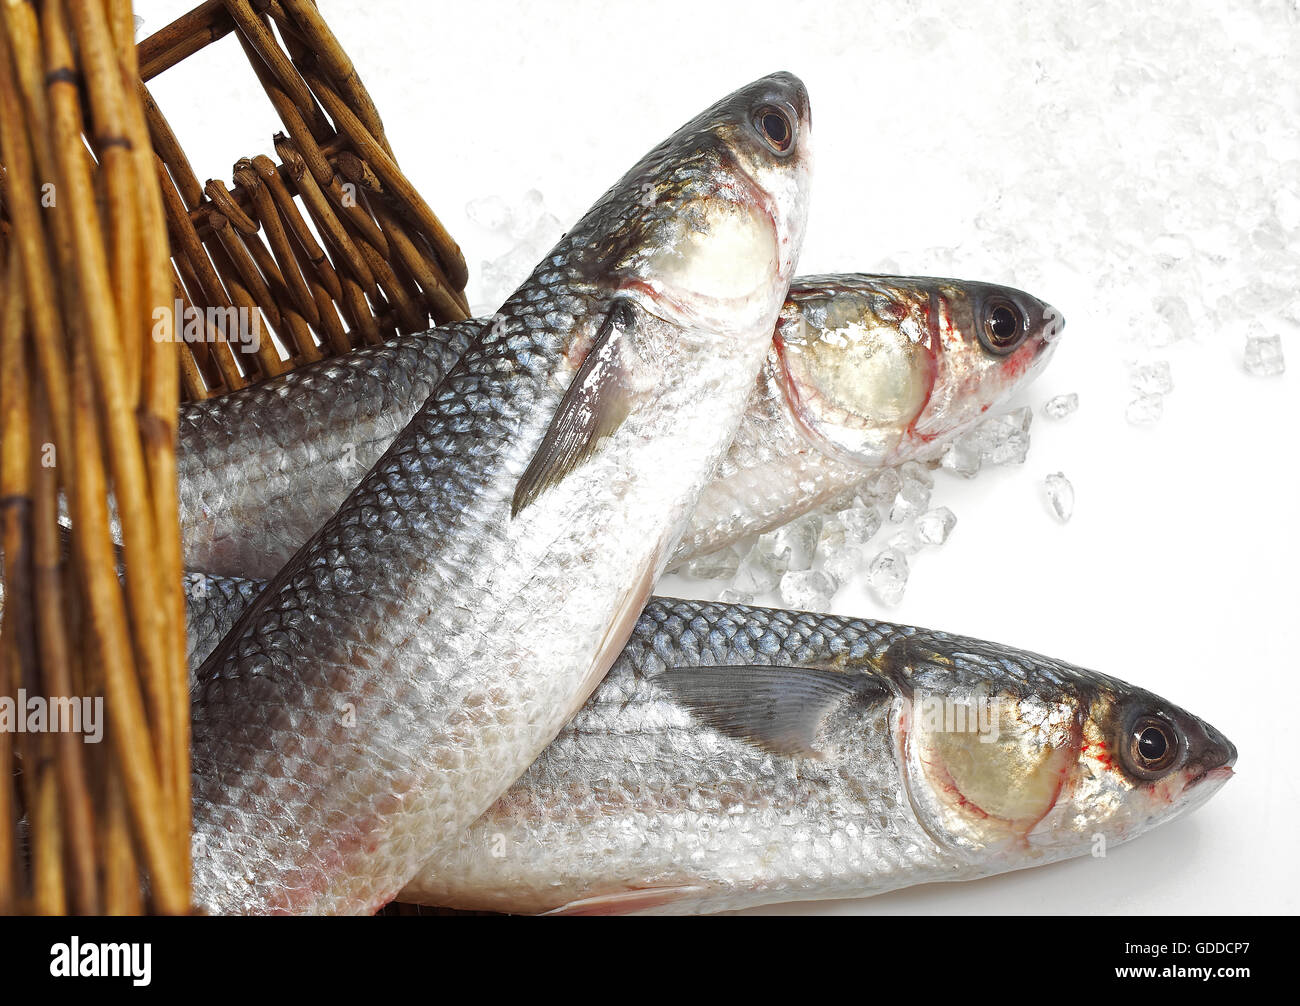 Mullet, chelon labrosus, Fresh Fishes on Ice Stock Photo